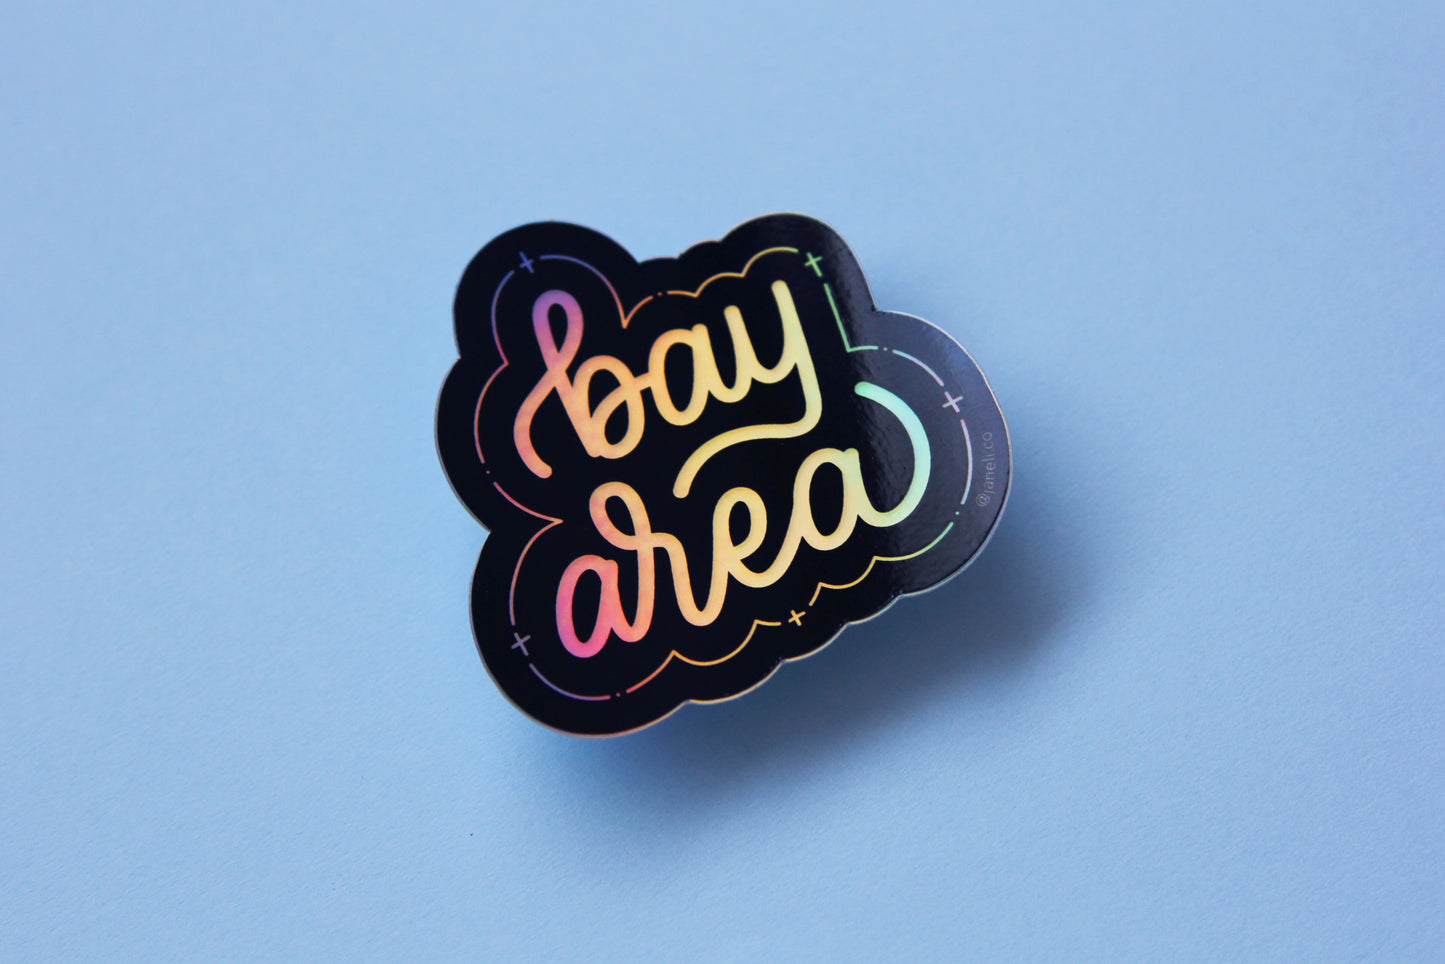 A holographic JaneLi.Co sticker that says "Bay Area" in cursive lettering over a sky blue background. 